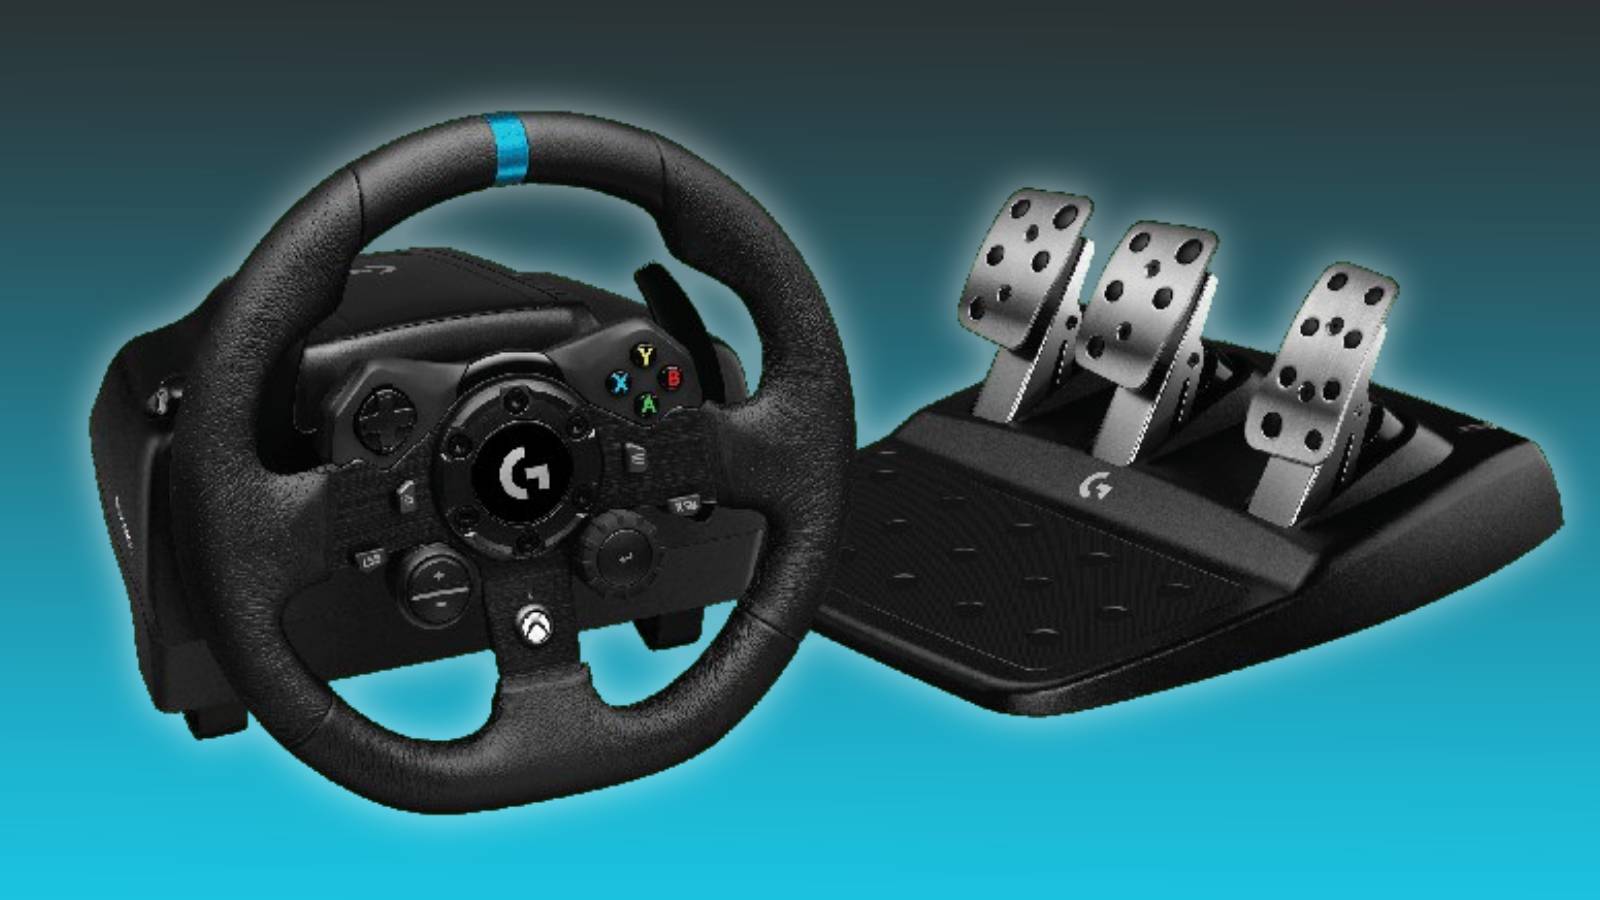 Image of the Logitech G923 Racing Wheel and Pedals on a blue and black background.